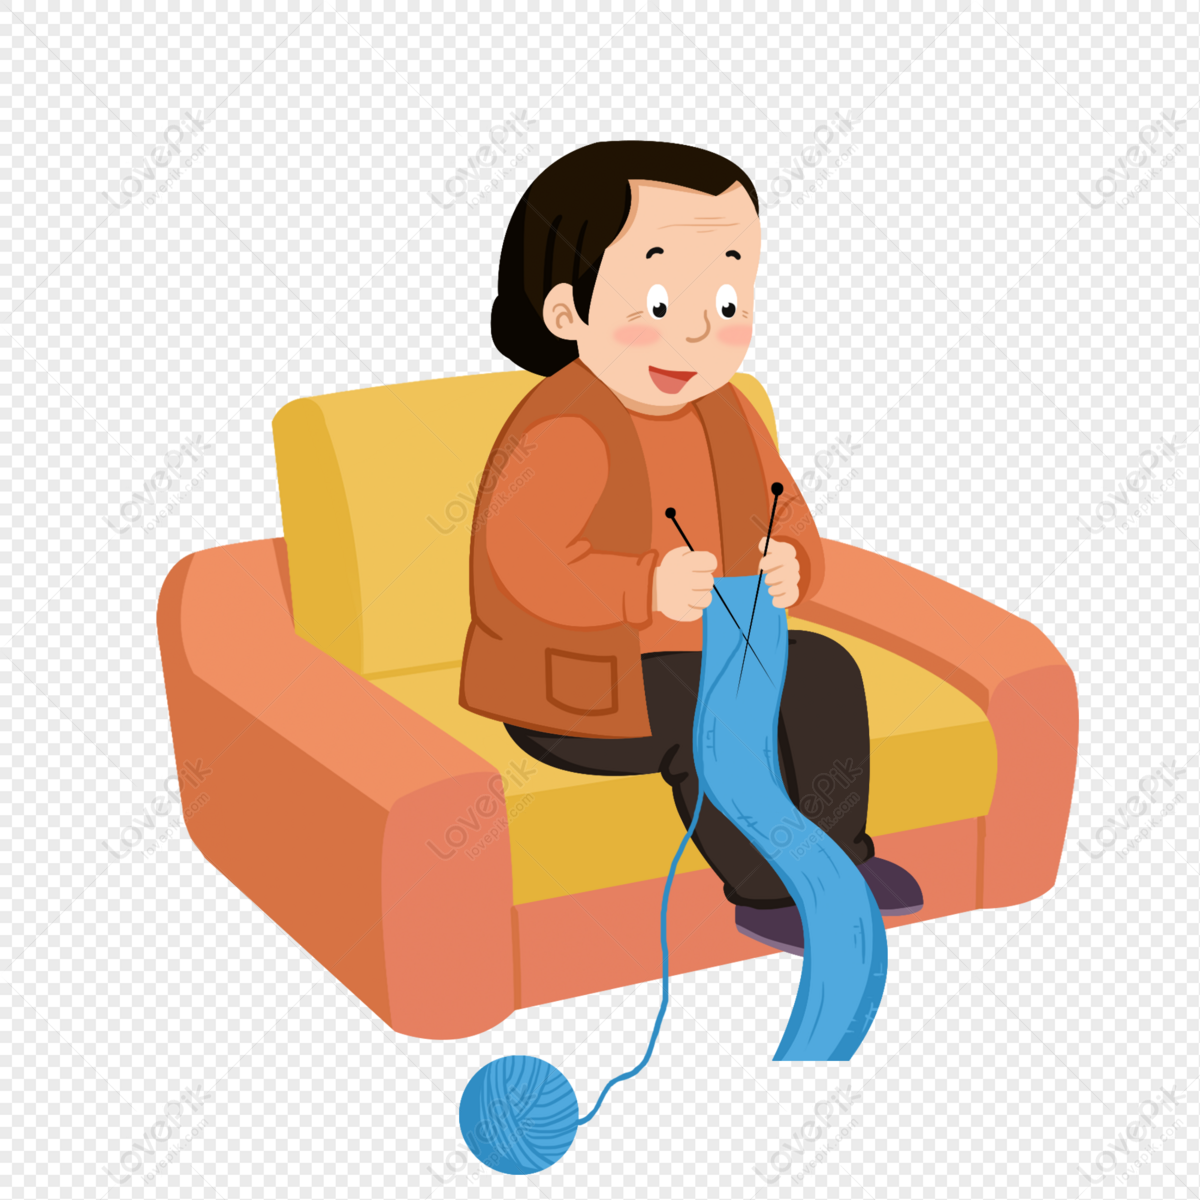 Grandma Knitting Sweater Cartoon Element At Home PNG Hd Transparent Image  And Clipart Image For Free Download - Lovepik | 401871874